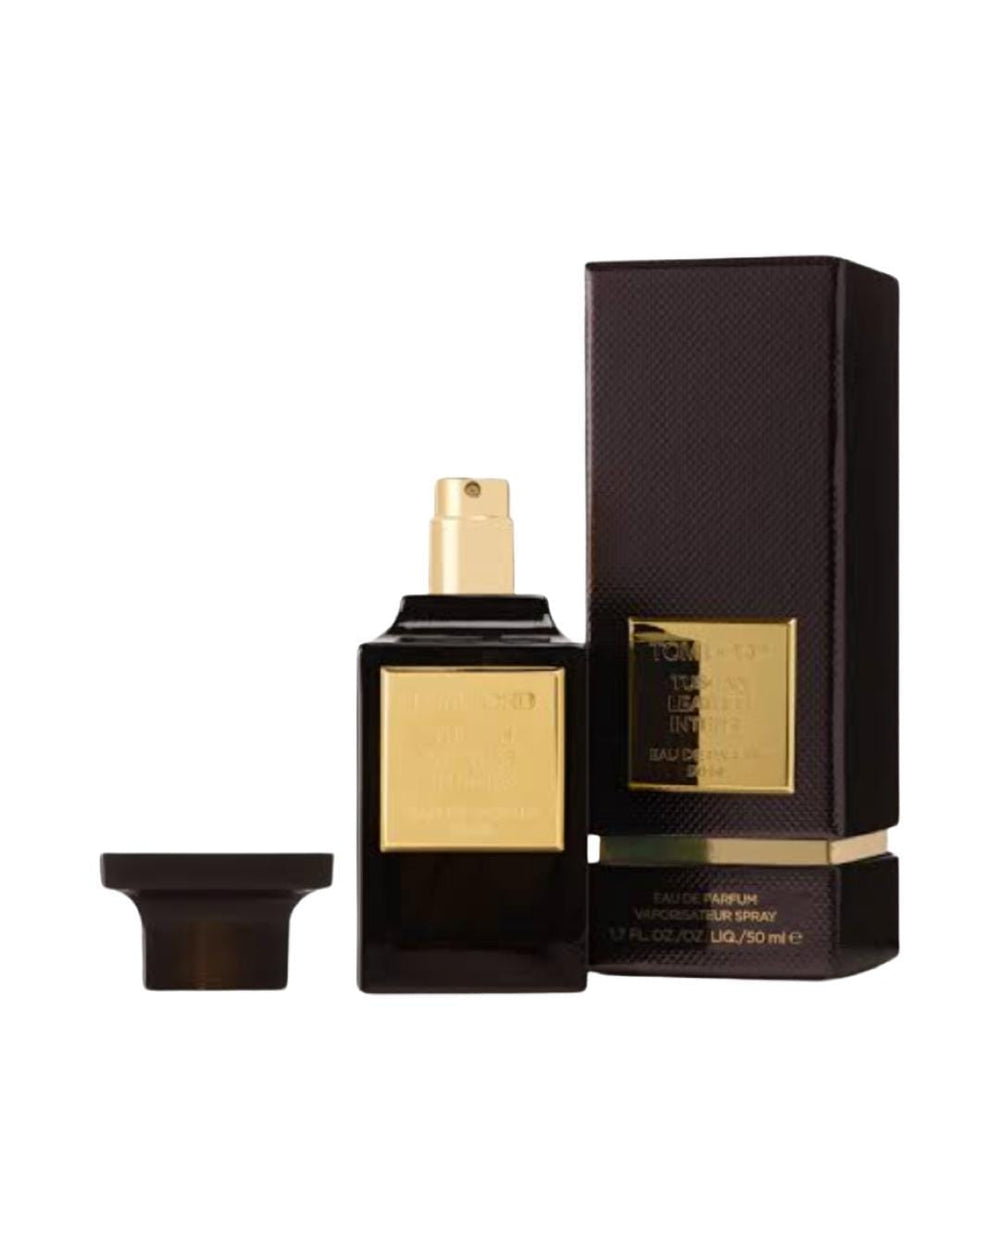 Tuscan Leather Intense by Tom Ford|FragranceUSA